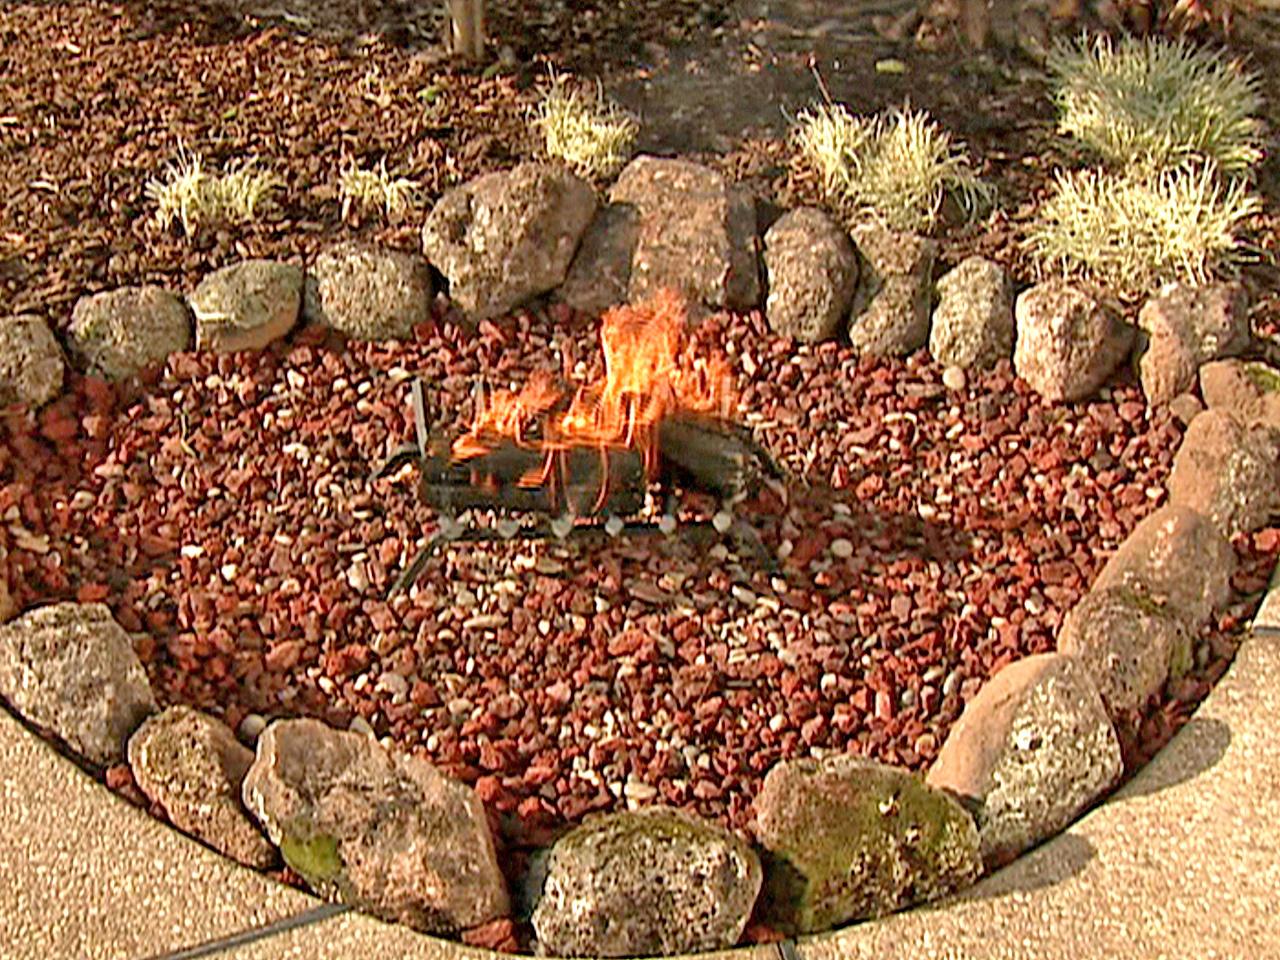 Outdoor Fire Pits And Pit Safety, What Kind Of Rocks For Fire Pit